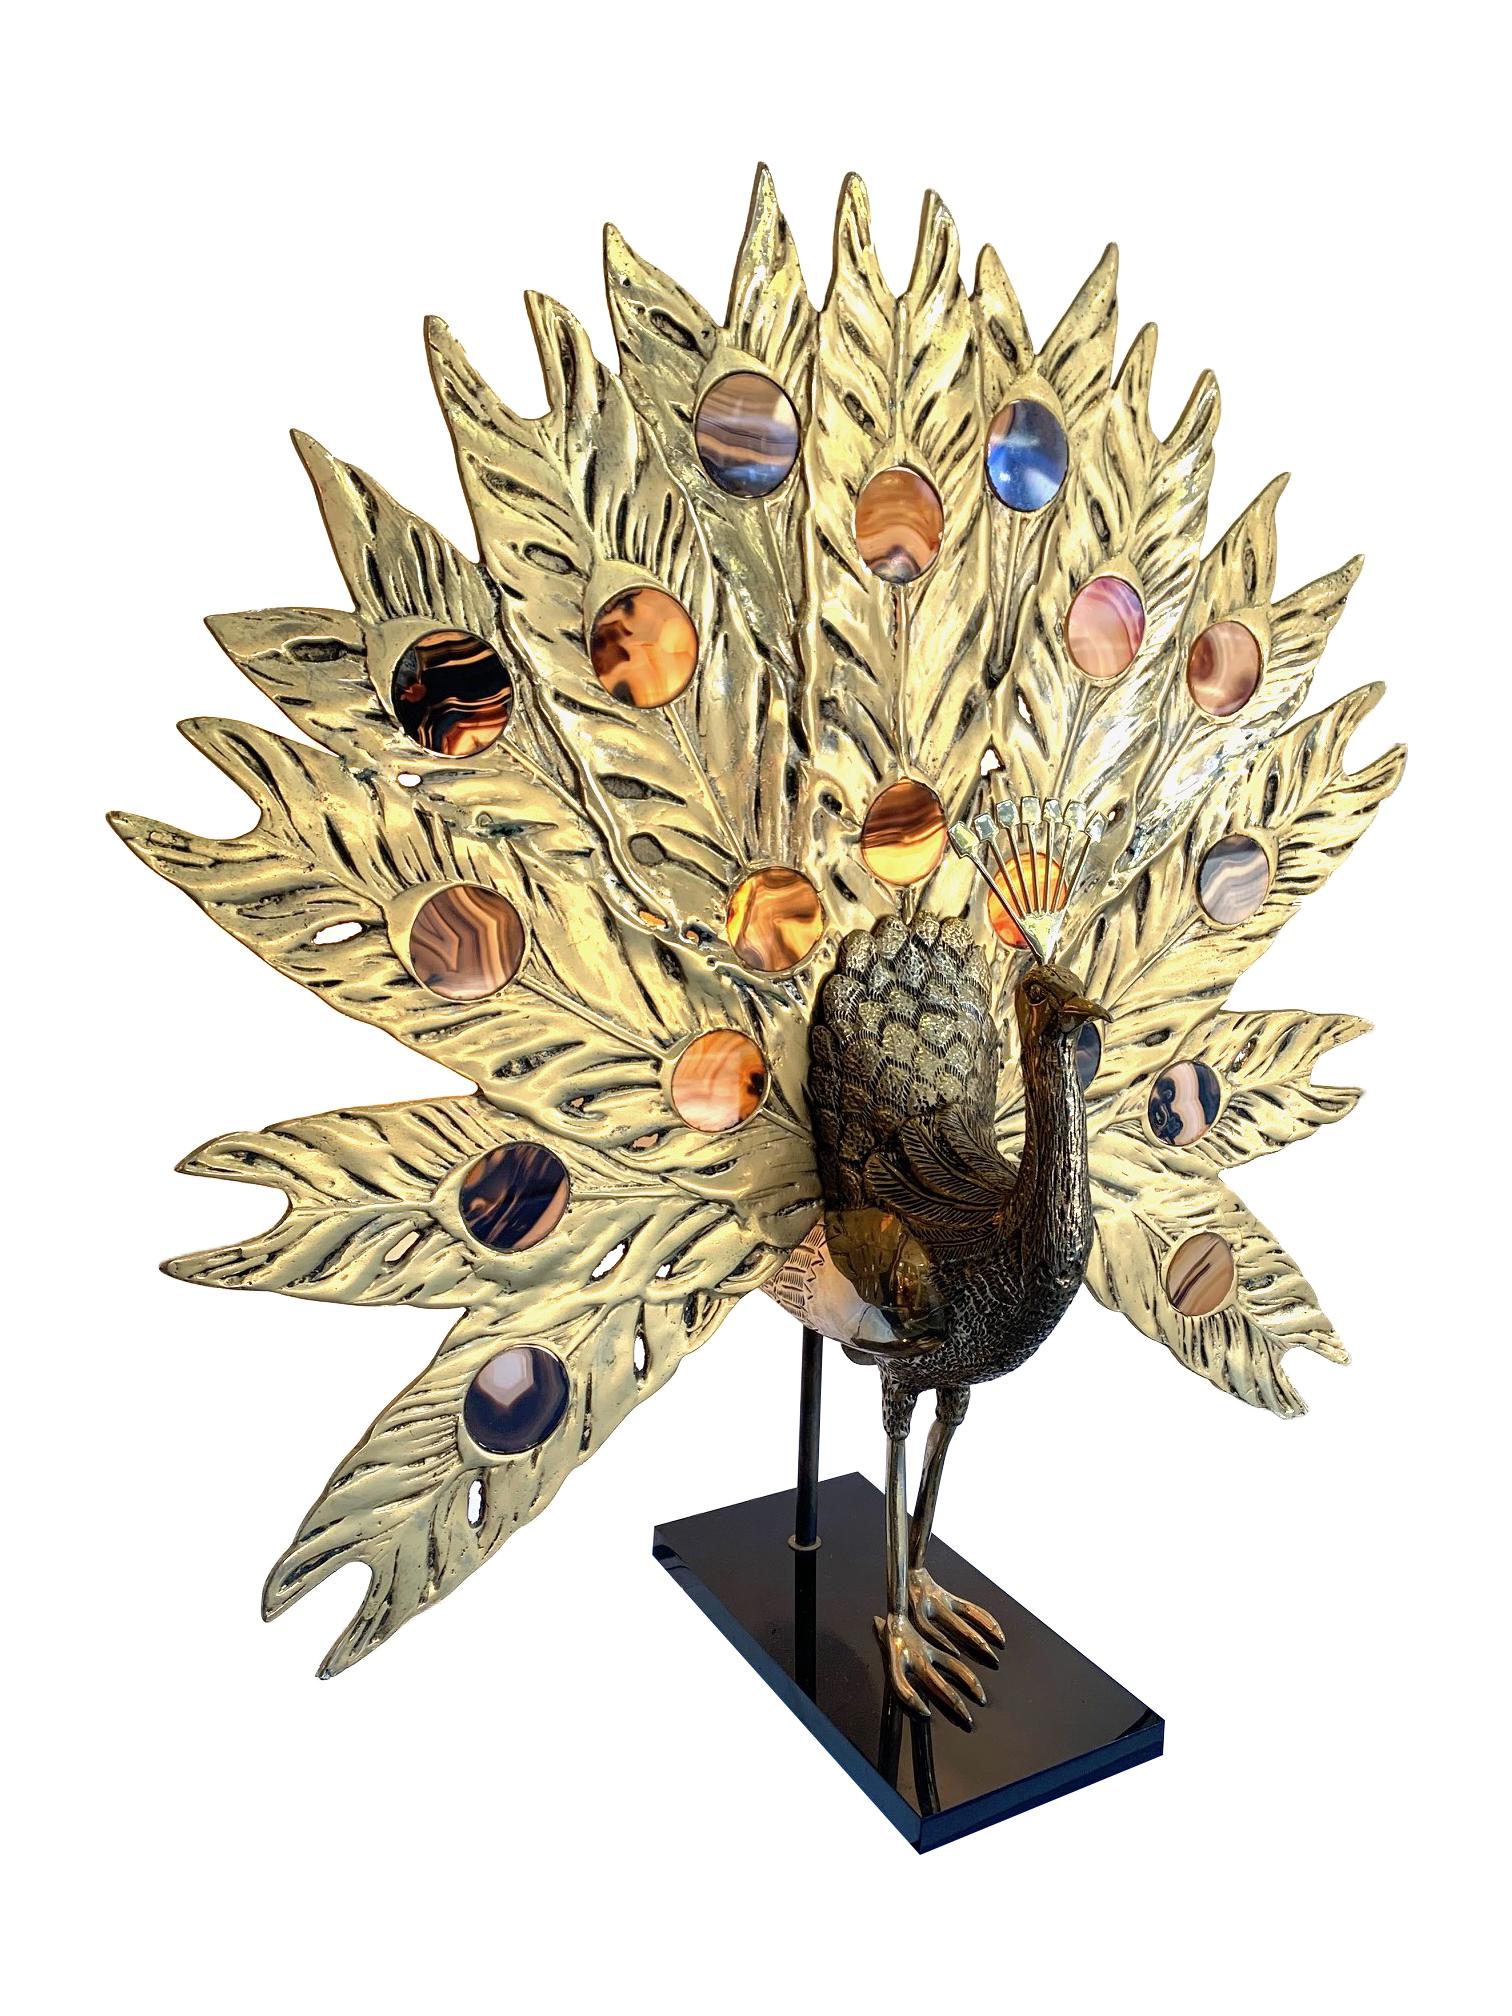 French Stunning Rare Large Brass Peacock Lamp with Agate Backlit Tail by Fondica 